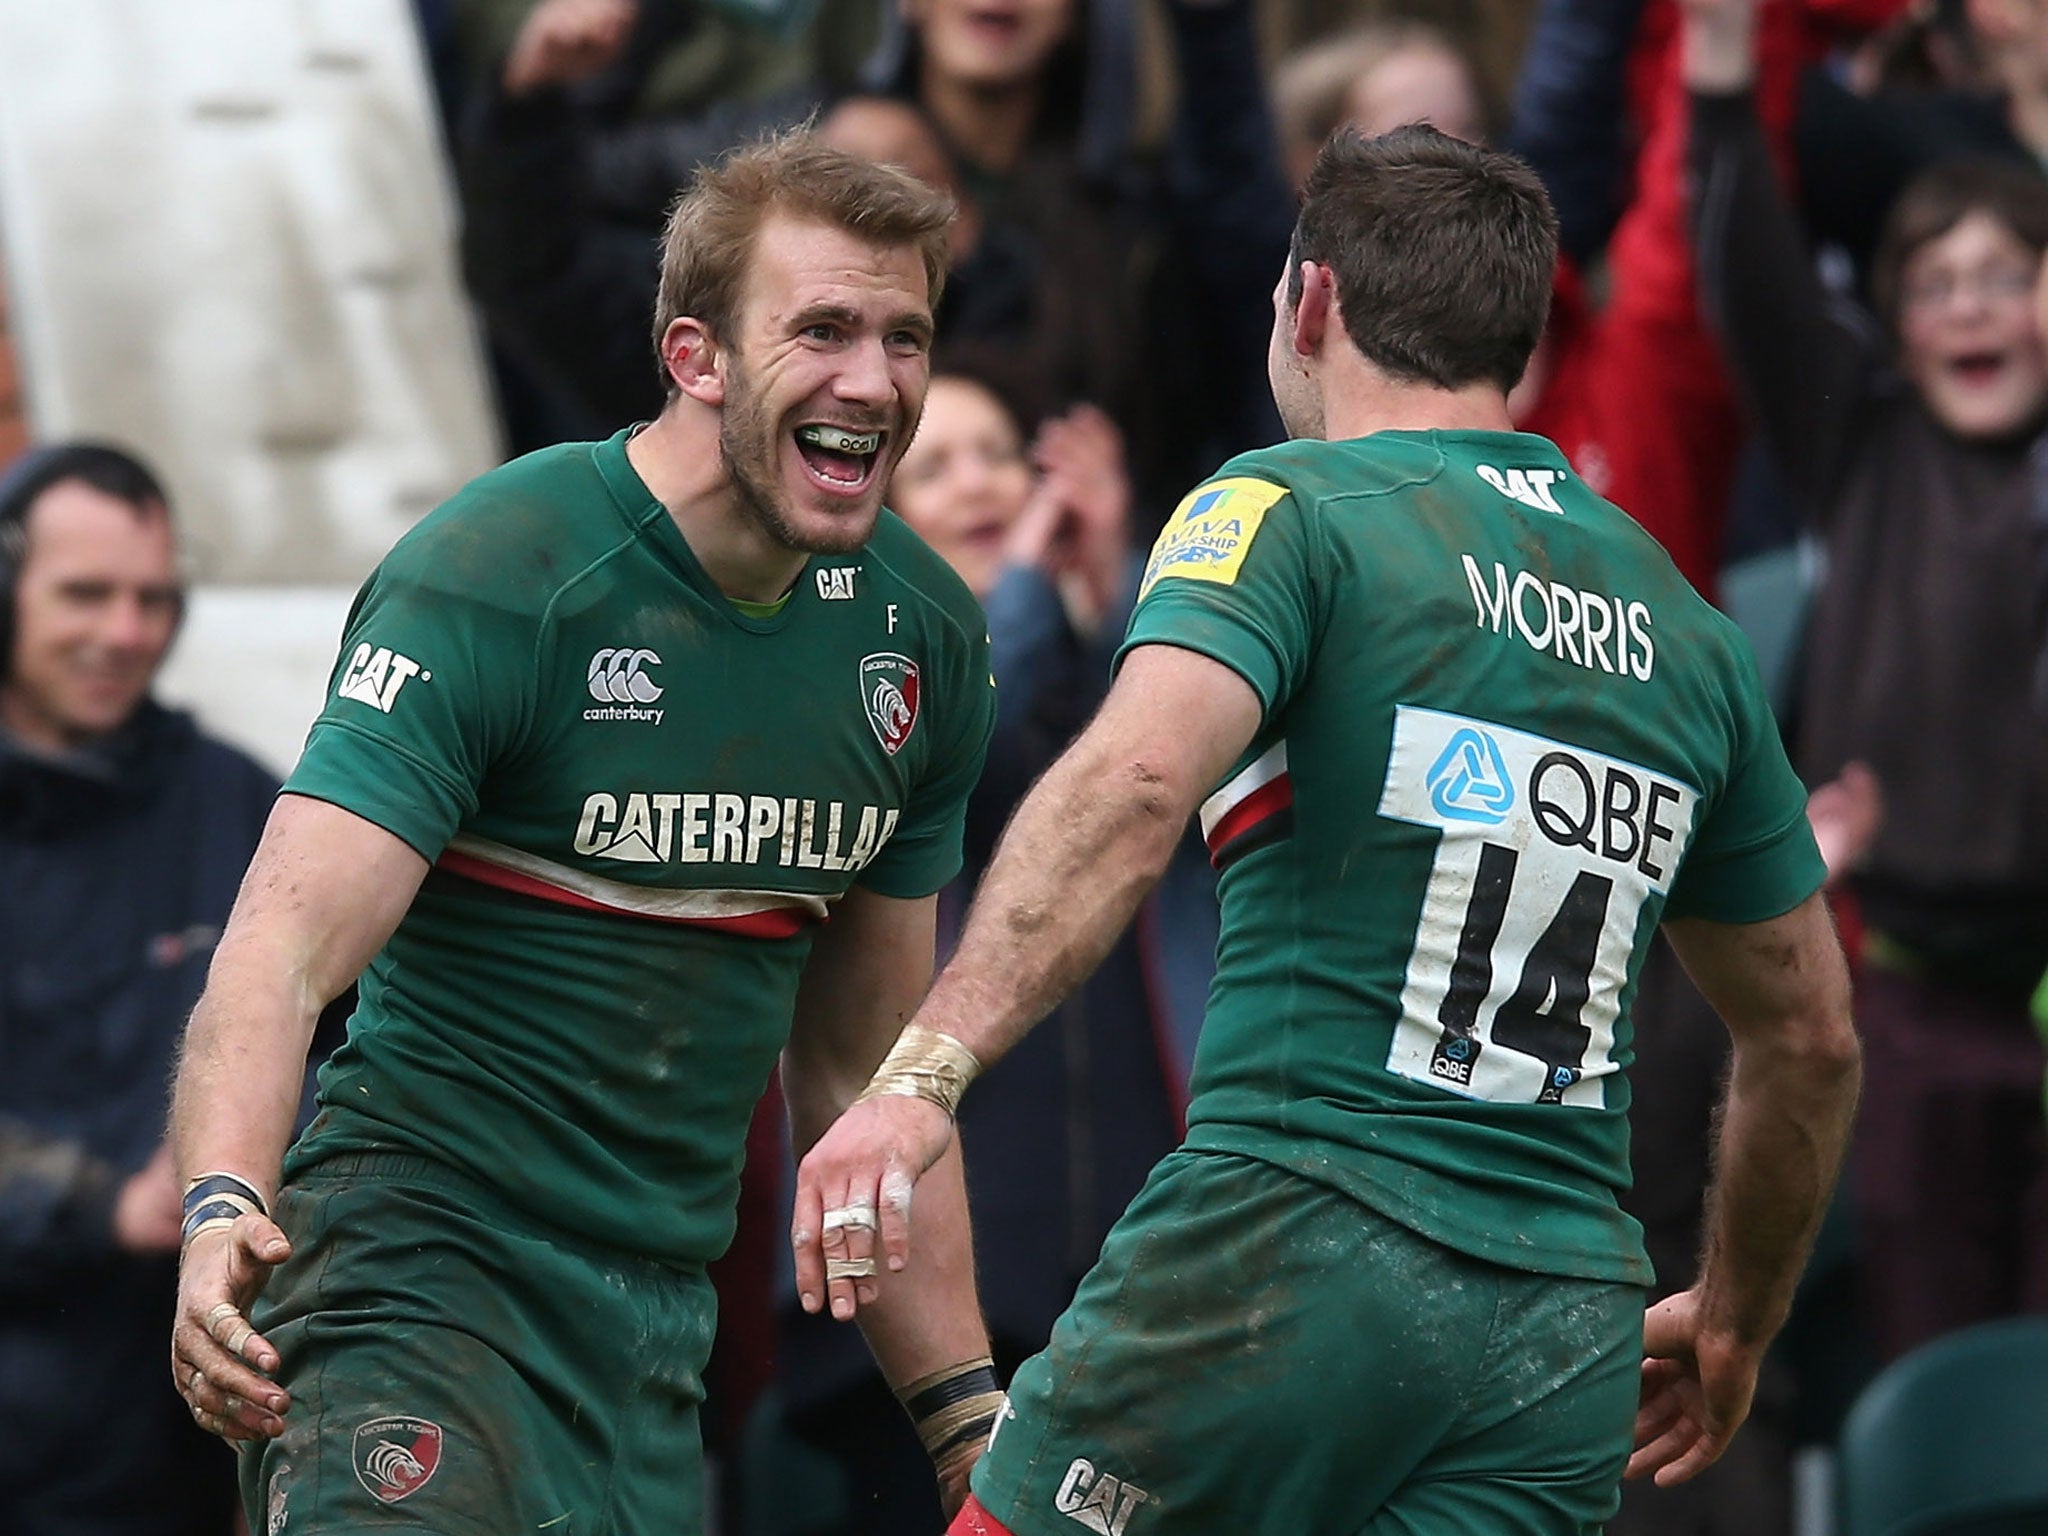 Leicester flanker Tom Croft (left) celebrates a try from team-mate Niall Morris